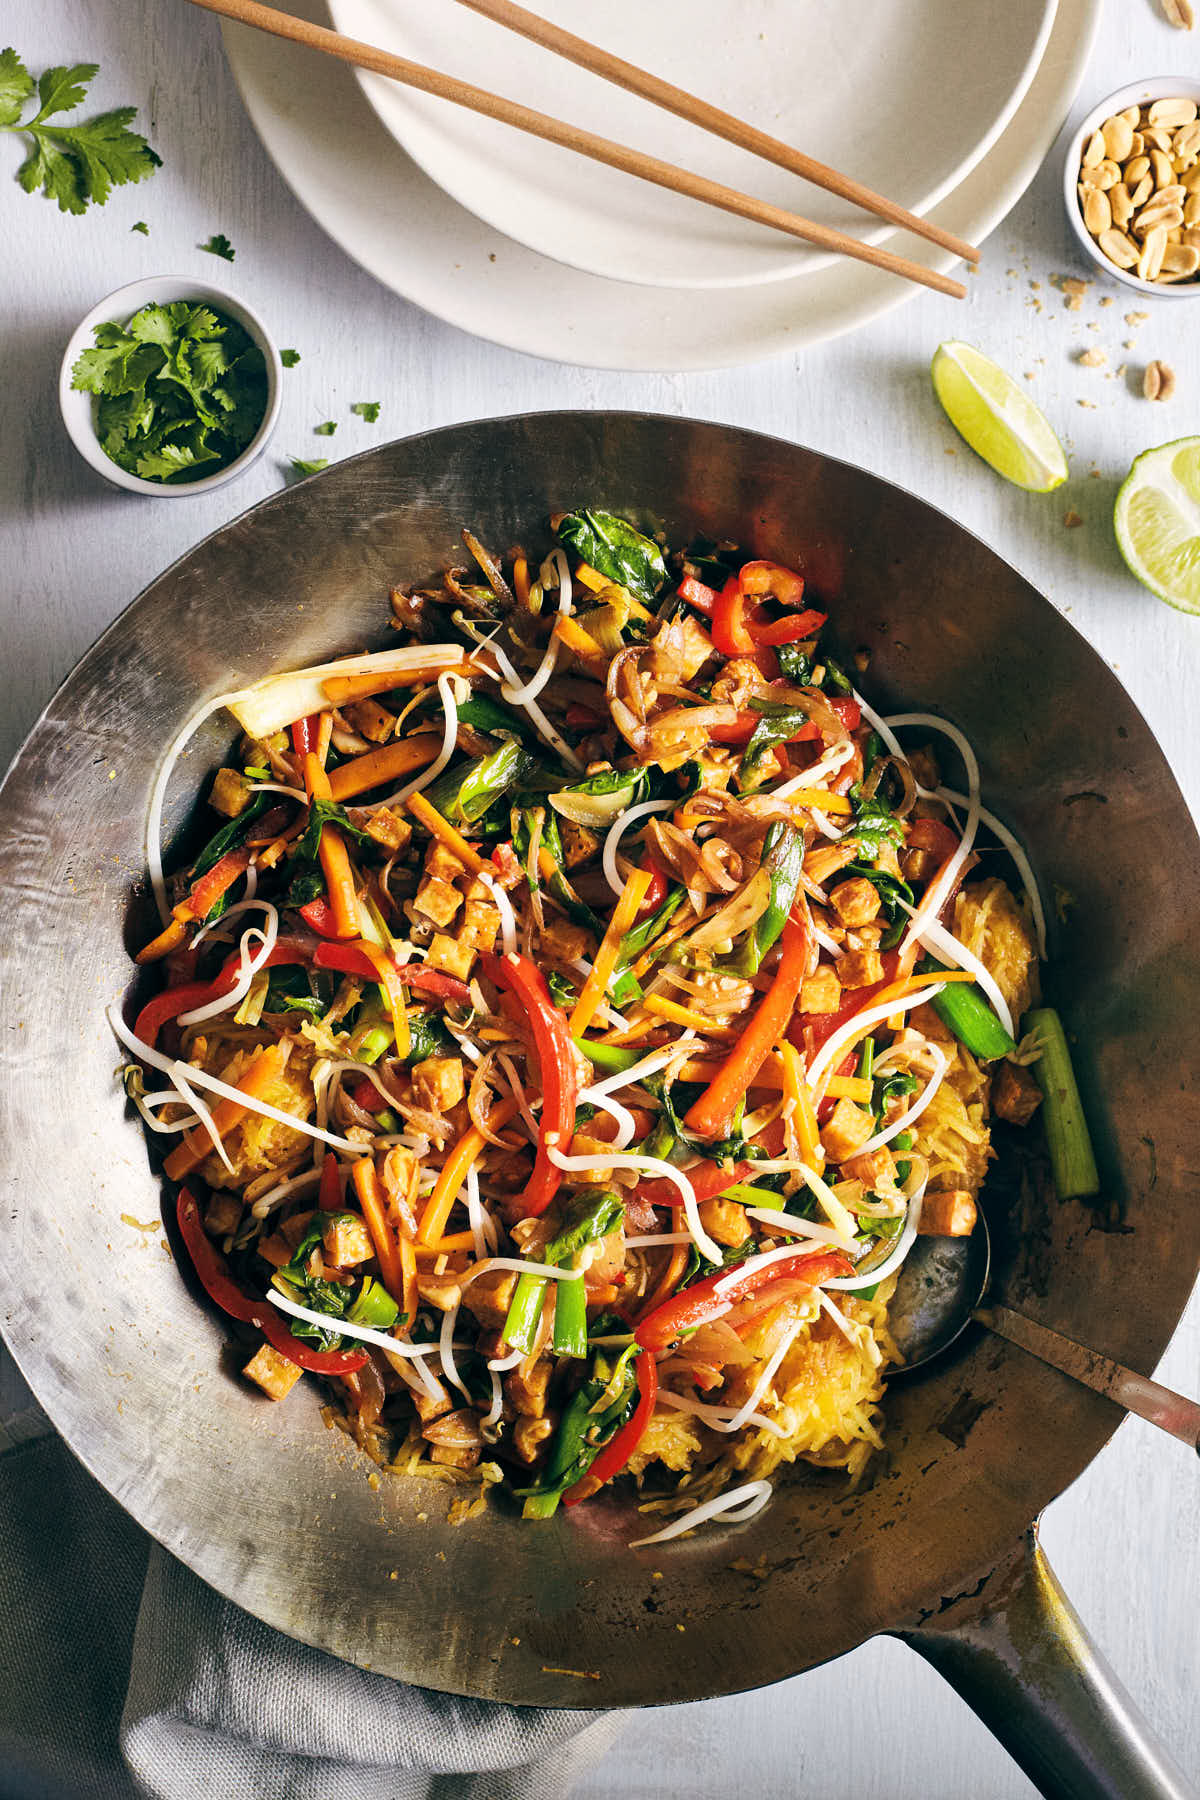 Spaghetti squash pad thai being cooked in a wok